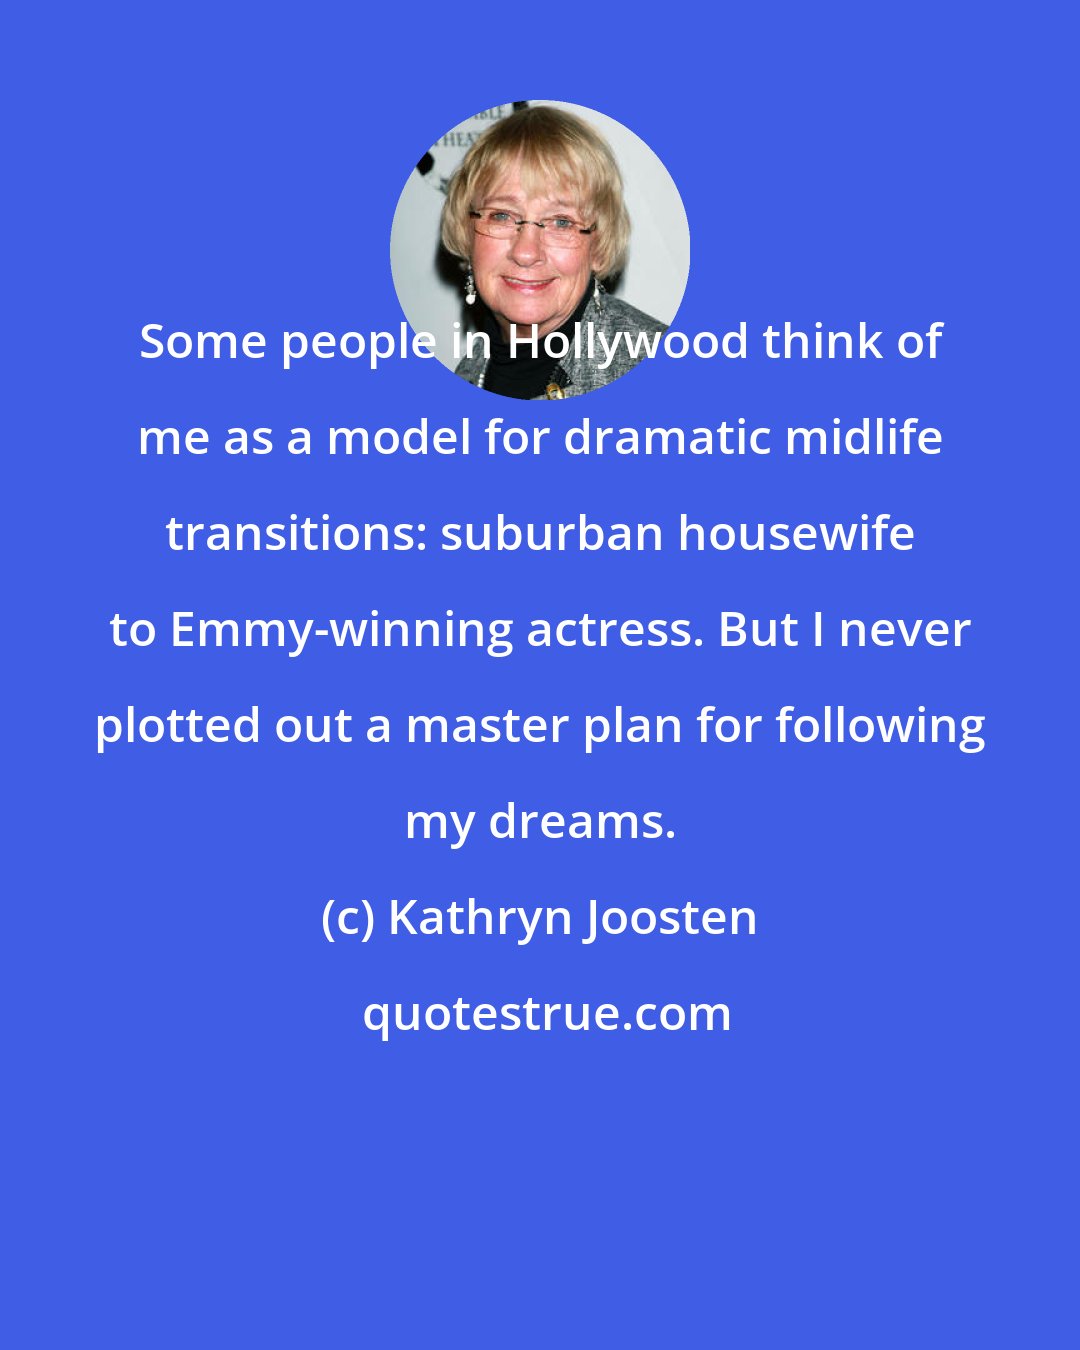 Kathryn Joosten: Some people in Hollywood think of me as a model for dramatic midlife transitions: suburban housewife to Emmy-winning actress. But I never plotted out a master plan for following my dreams.